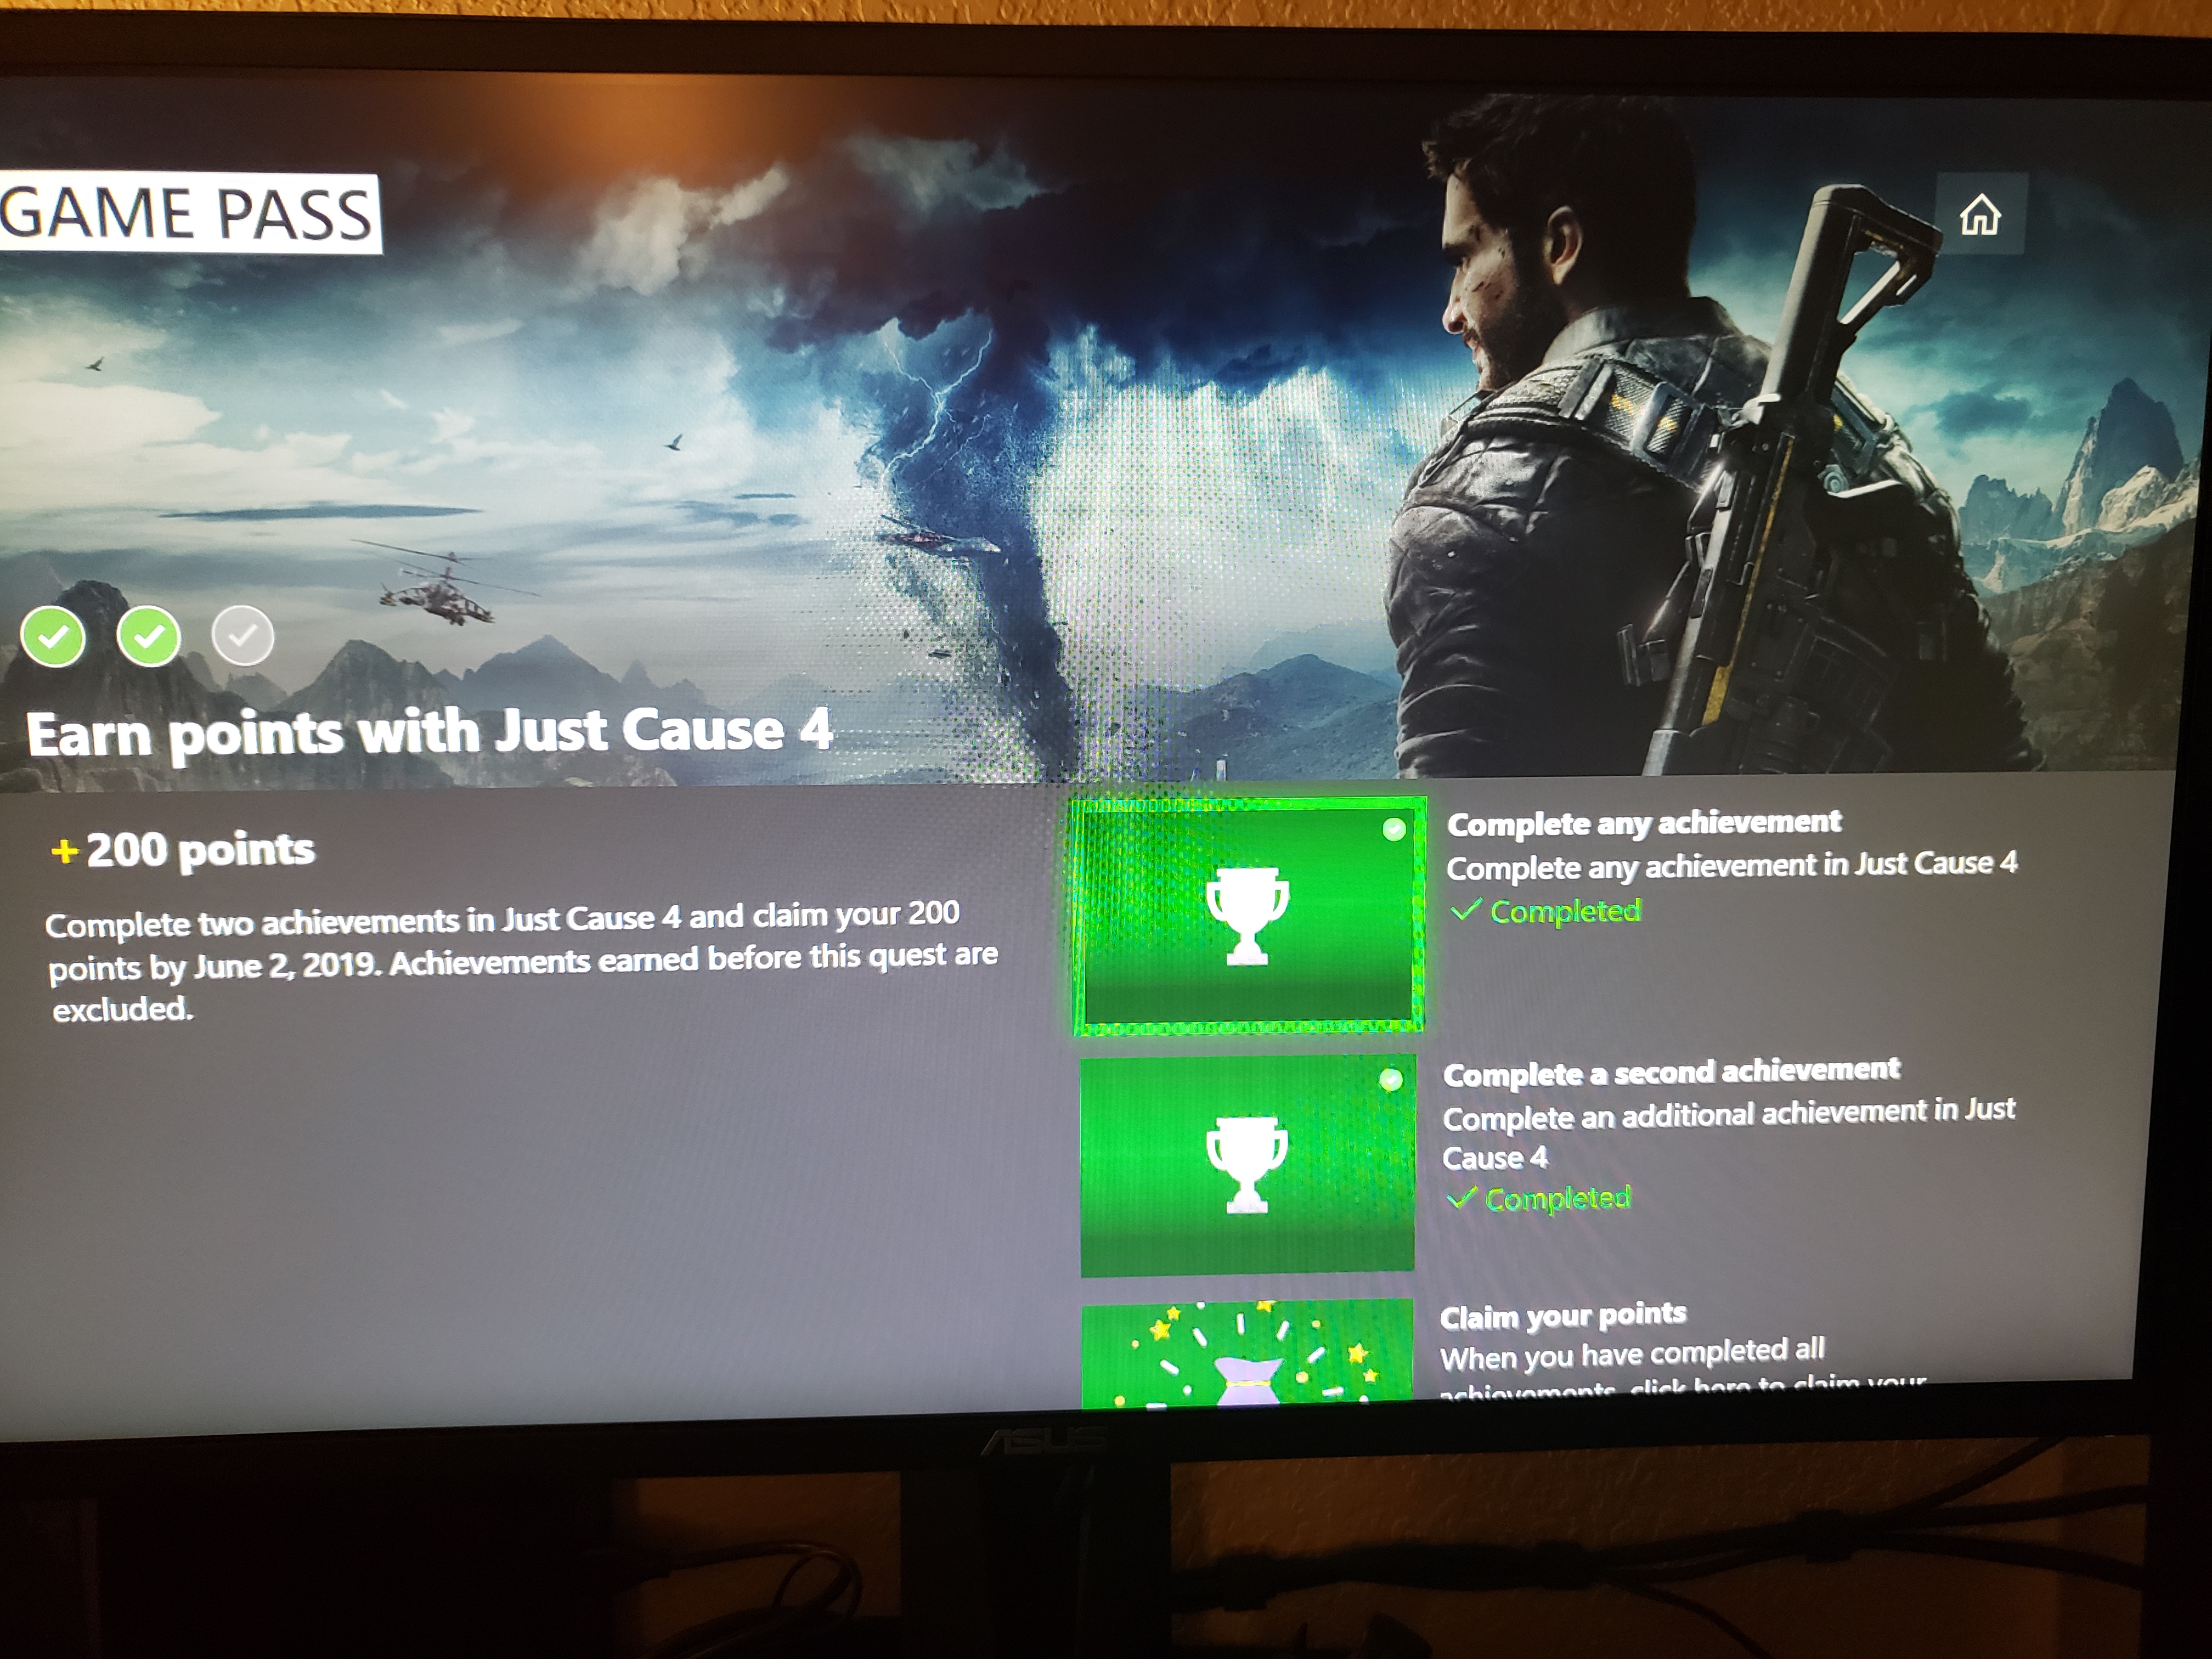 Microsoft launches Xbox Game Pass Quests, giving players the chance to earn  rewards for playing – GeekWire